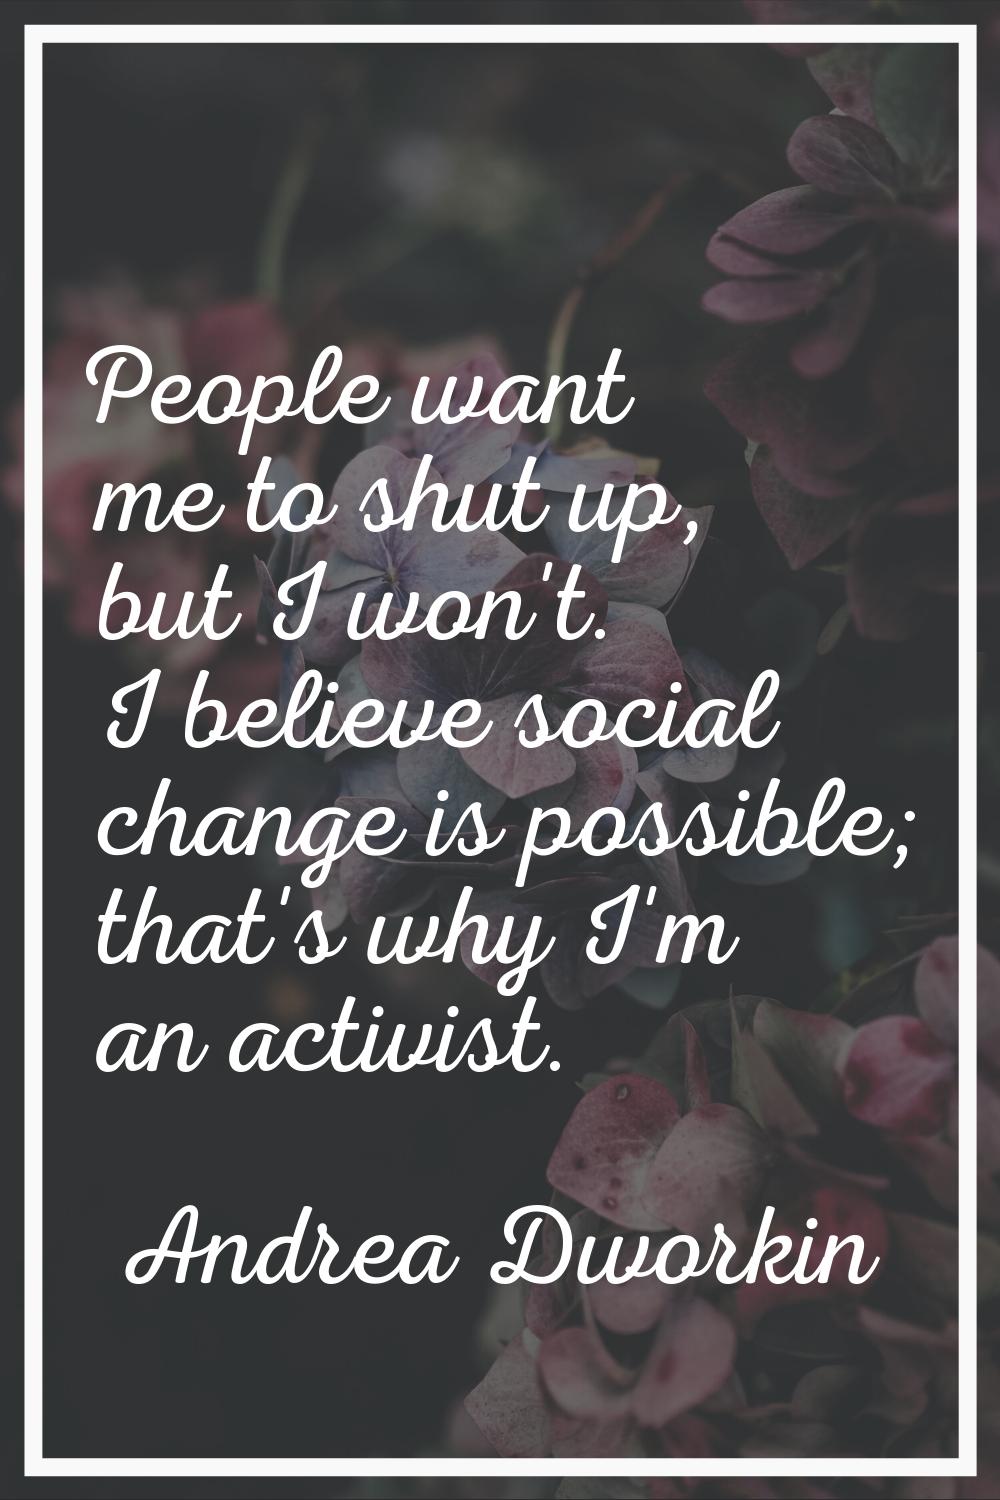 People want me to shut up, but I won't. I believe social change is possible; that's why I'm an acti